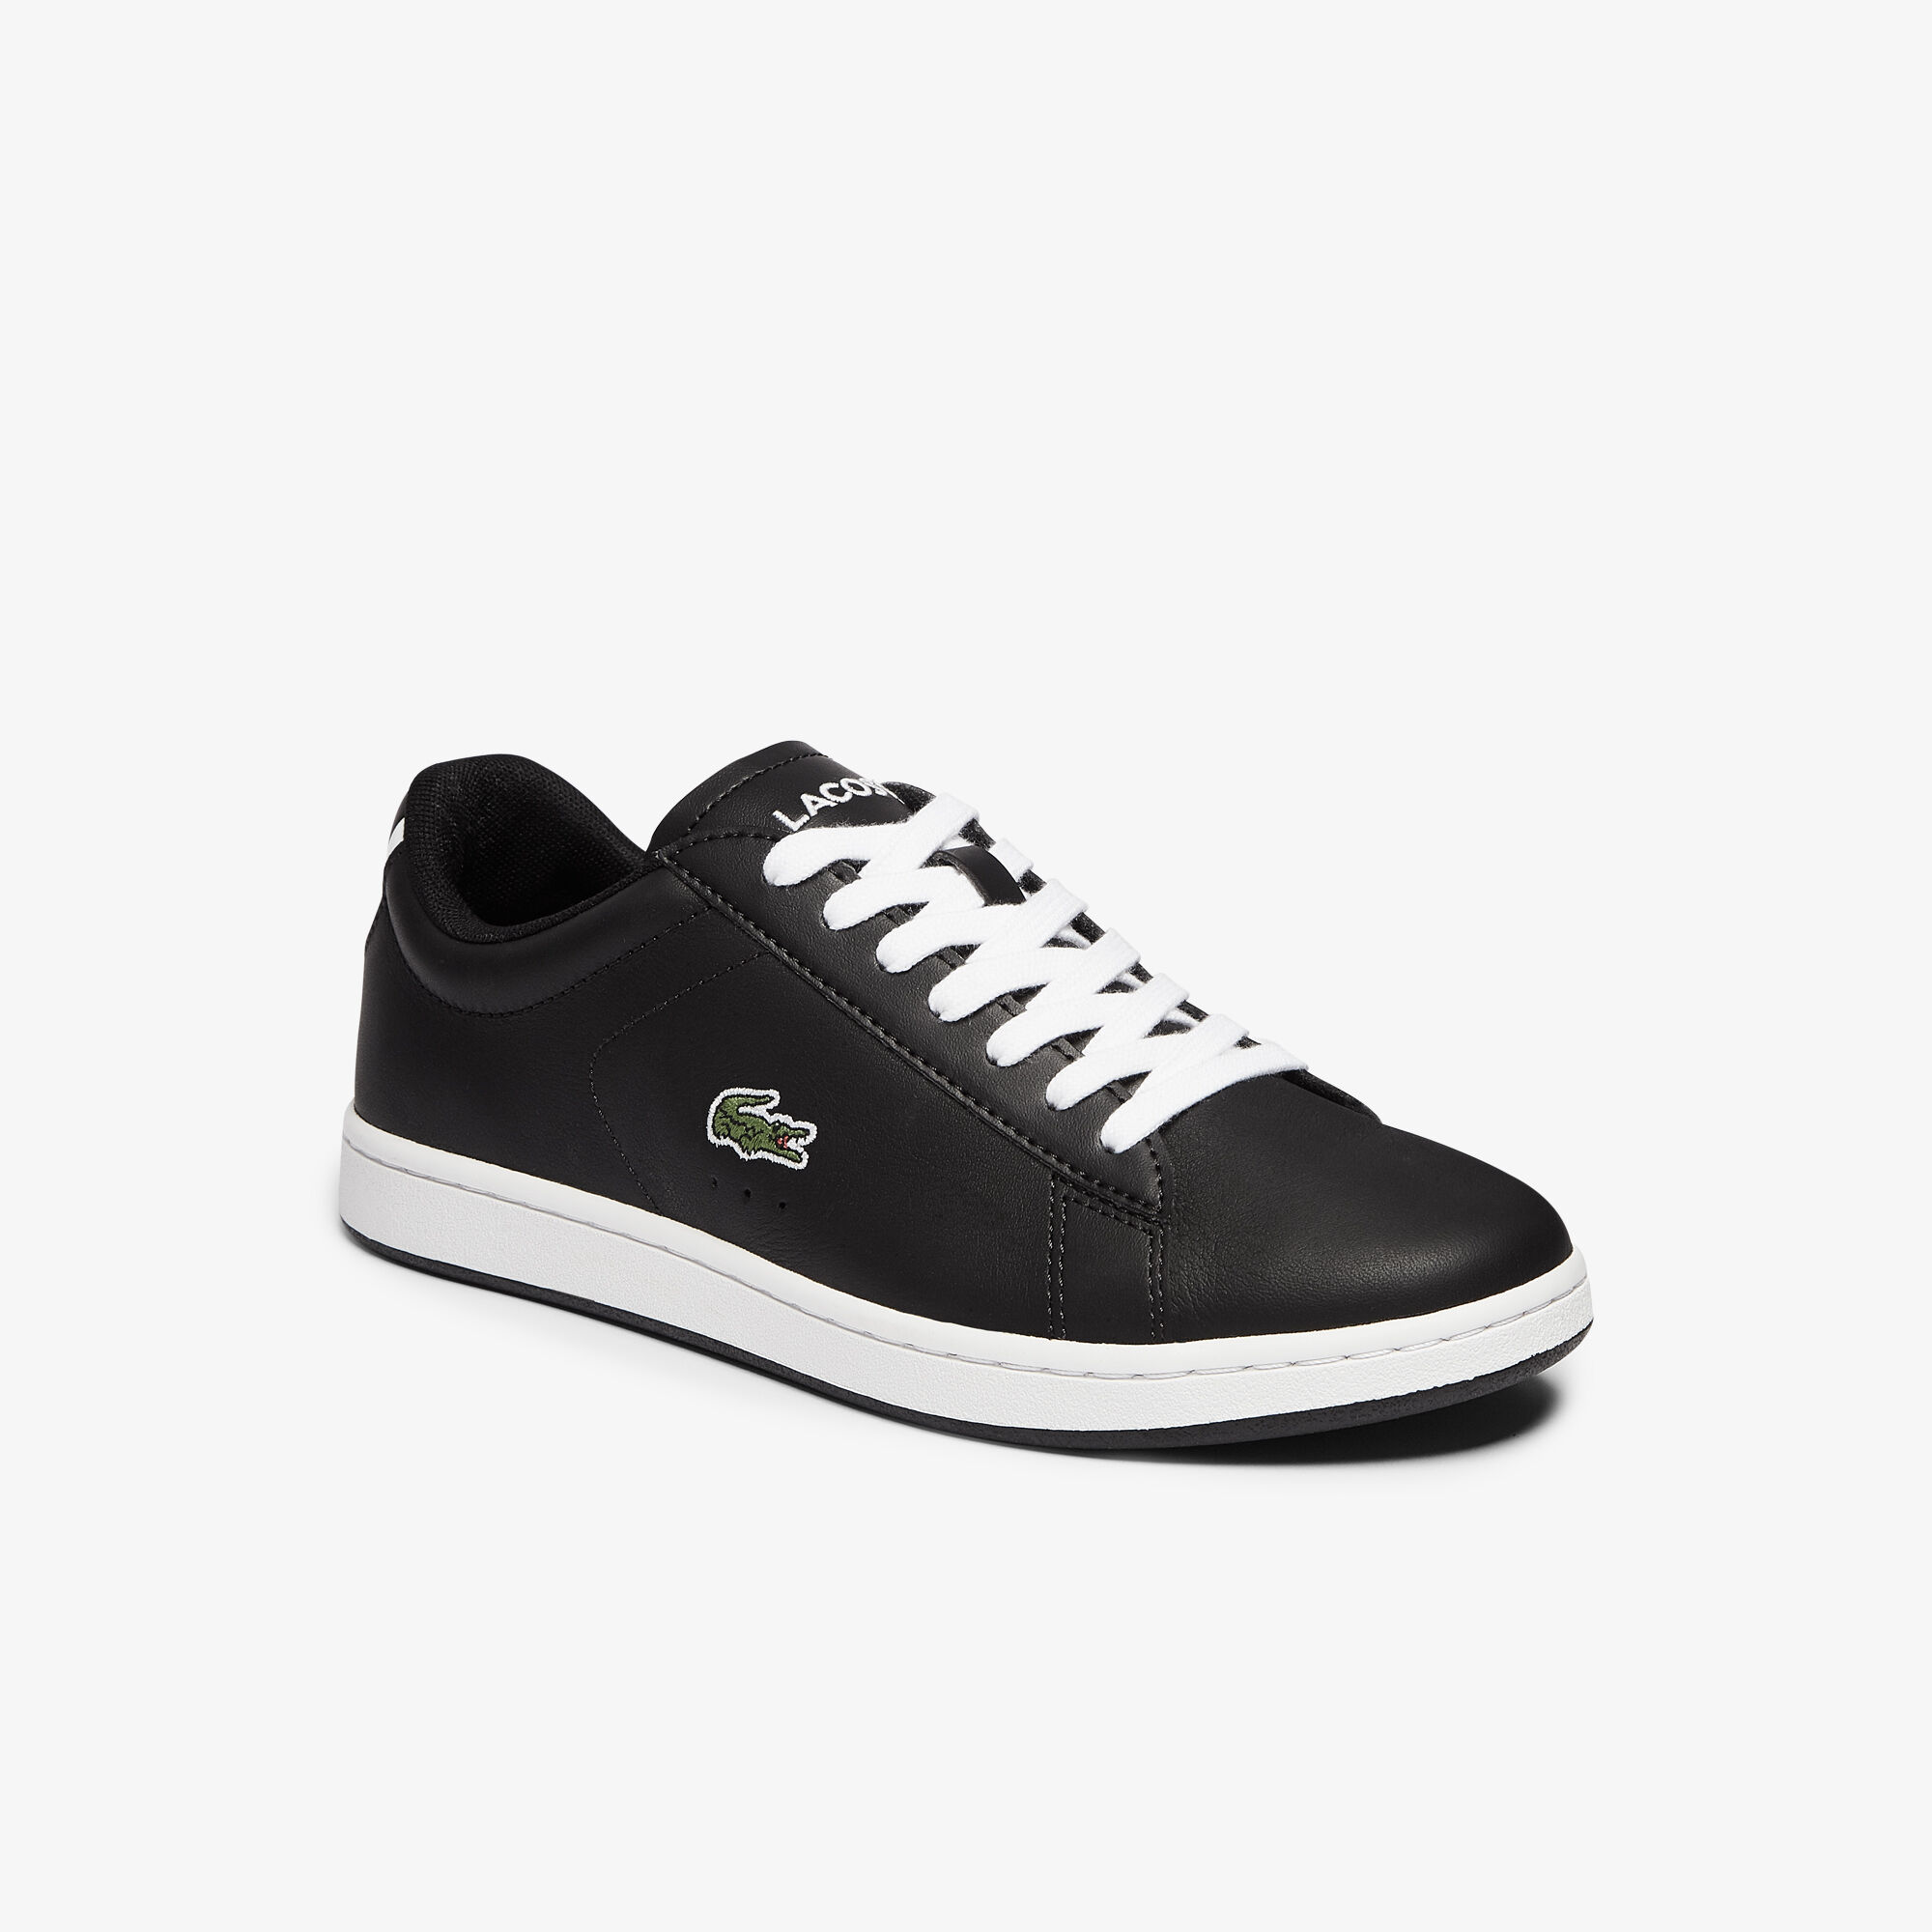 Women's Carnaby Evo Leather Trainers